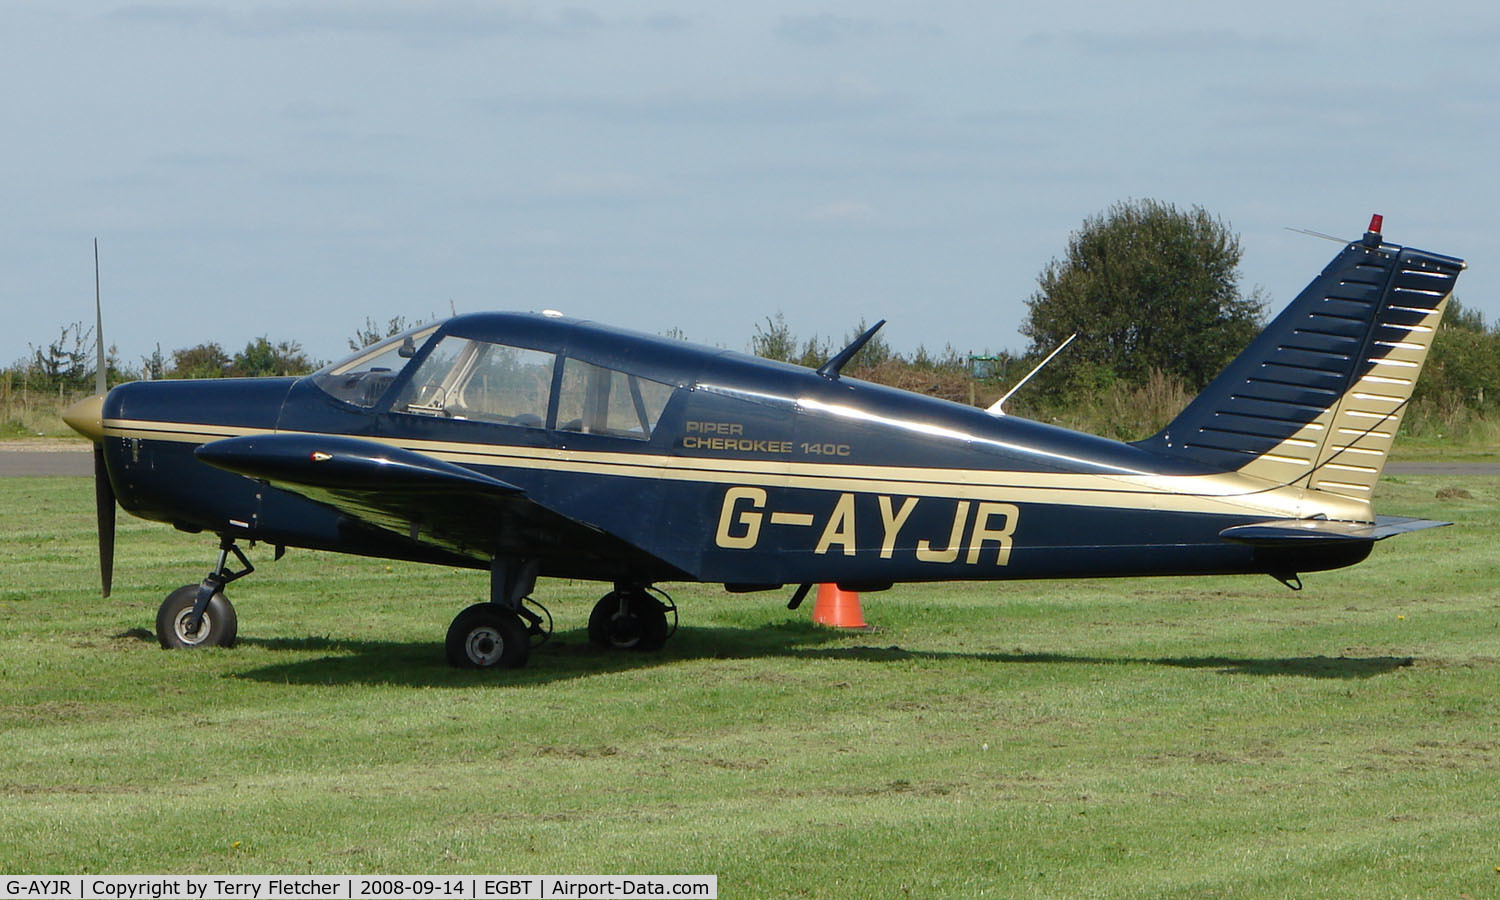 G-AYJR, 1970 Piper PA-28-140 Cherokee C/N 28-26694, A visitor to the 2008 Turweston Vintage and Classic Day